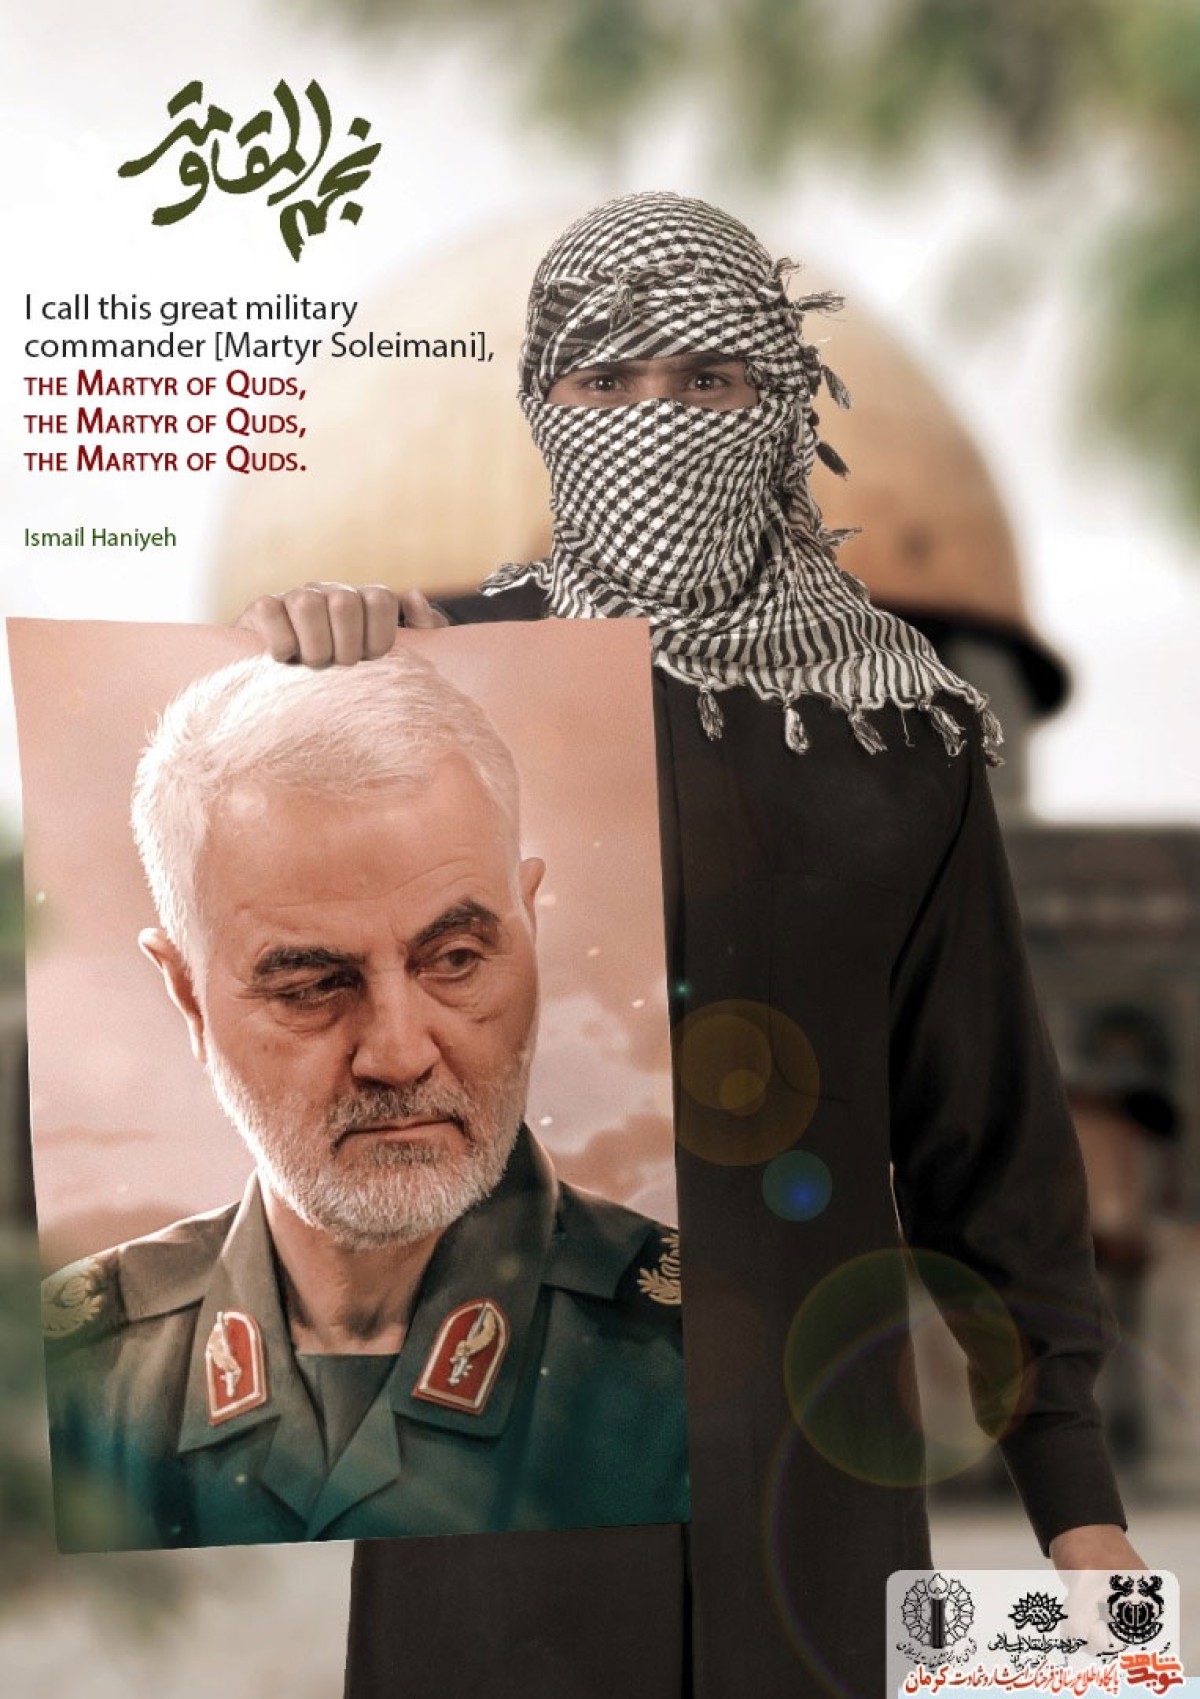  Martyr Gen.Soleimani belonged to the entire Islamic Umma, rather than belonging to a single country